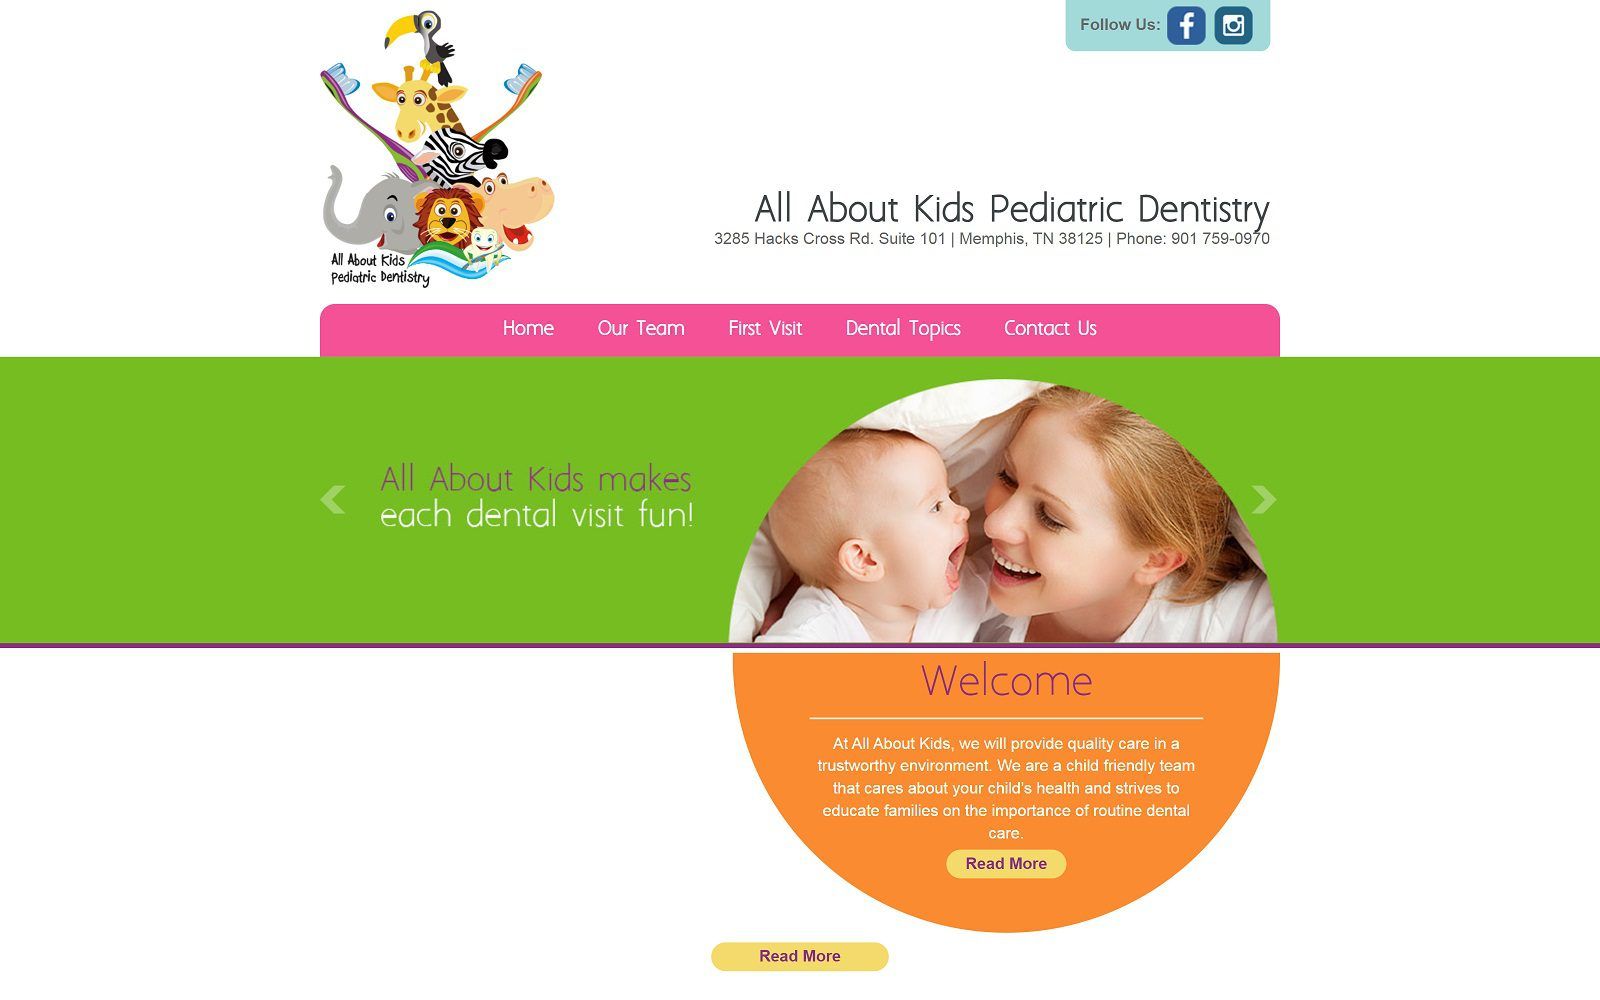 The screenshot of all about kids pediatric dentistry website